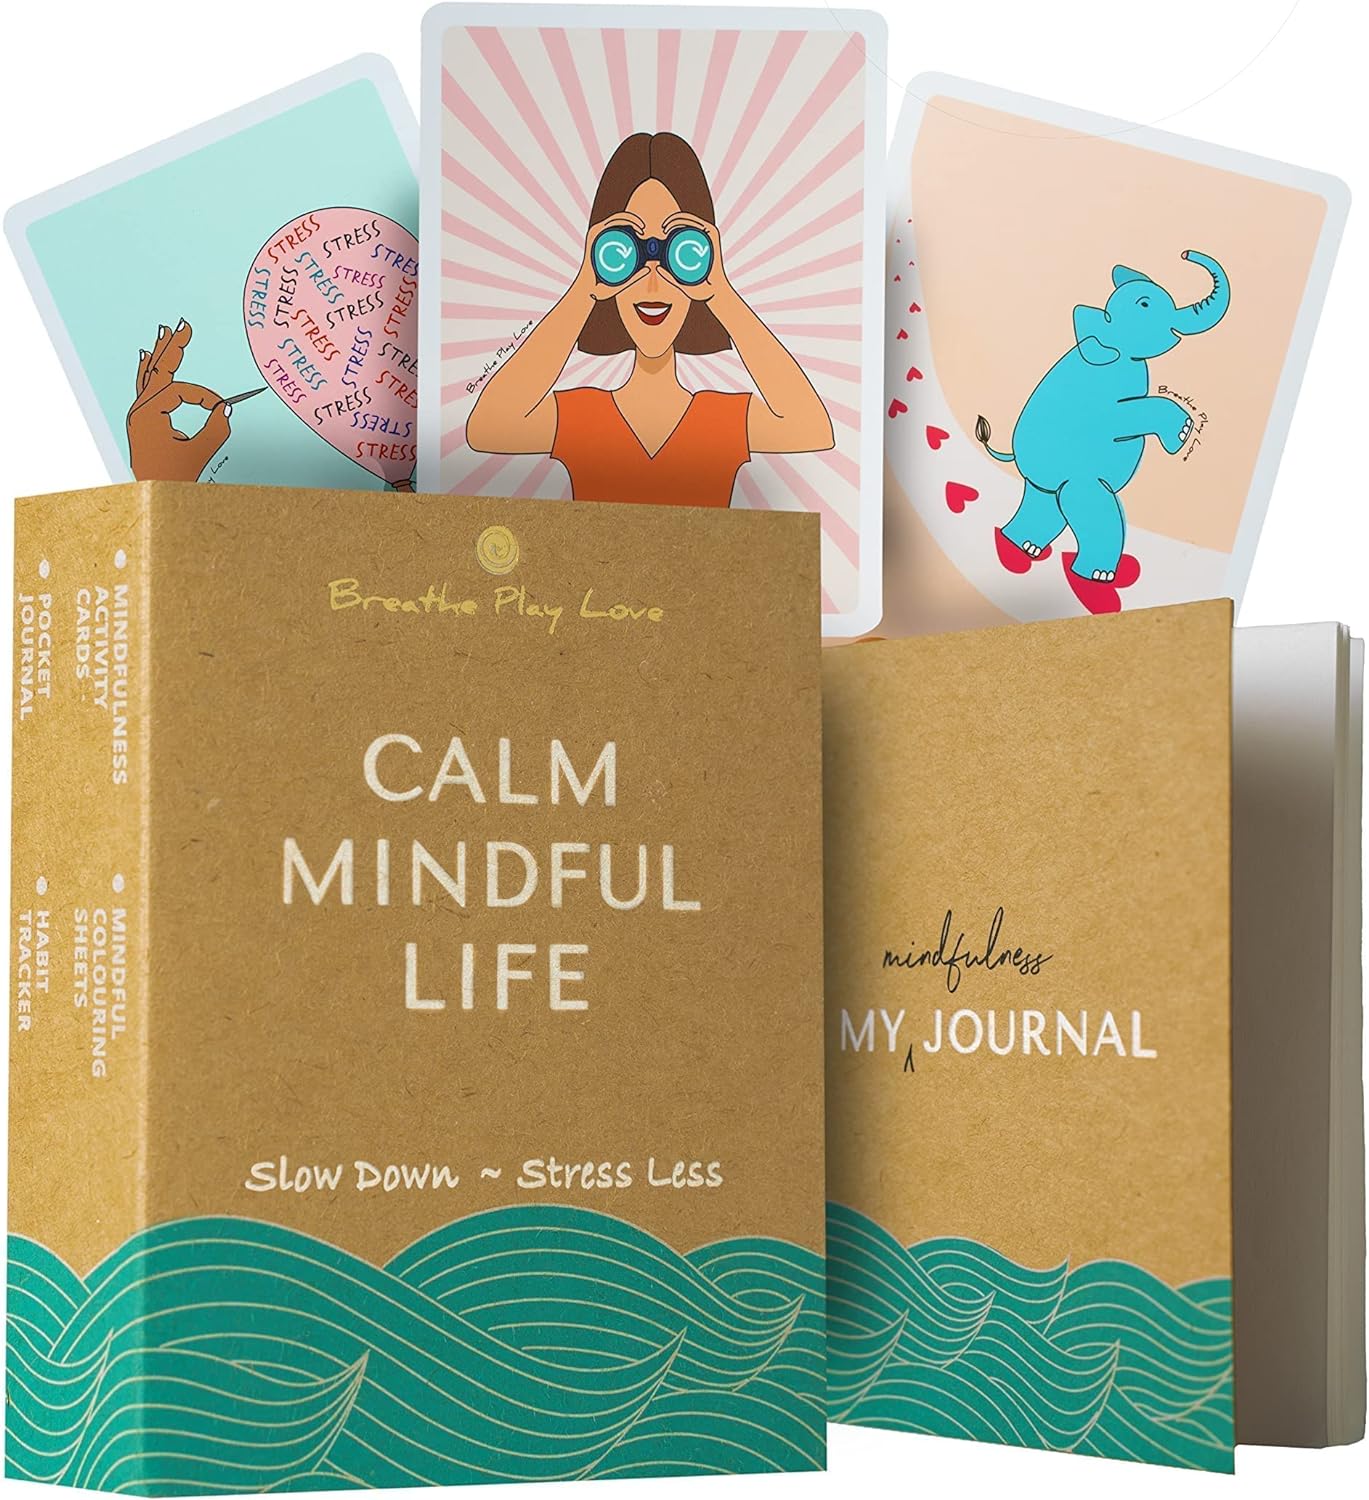 Breathe Play Love Mindfulness Gift Box—33 Mindfulness Challenge Cards, Pocket Journal, Mindful Colouring—Wellbeing & Self-Care Gifts for Women, Men, Teenagers for Stocking Fillers & Secret Santa